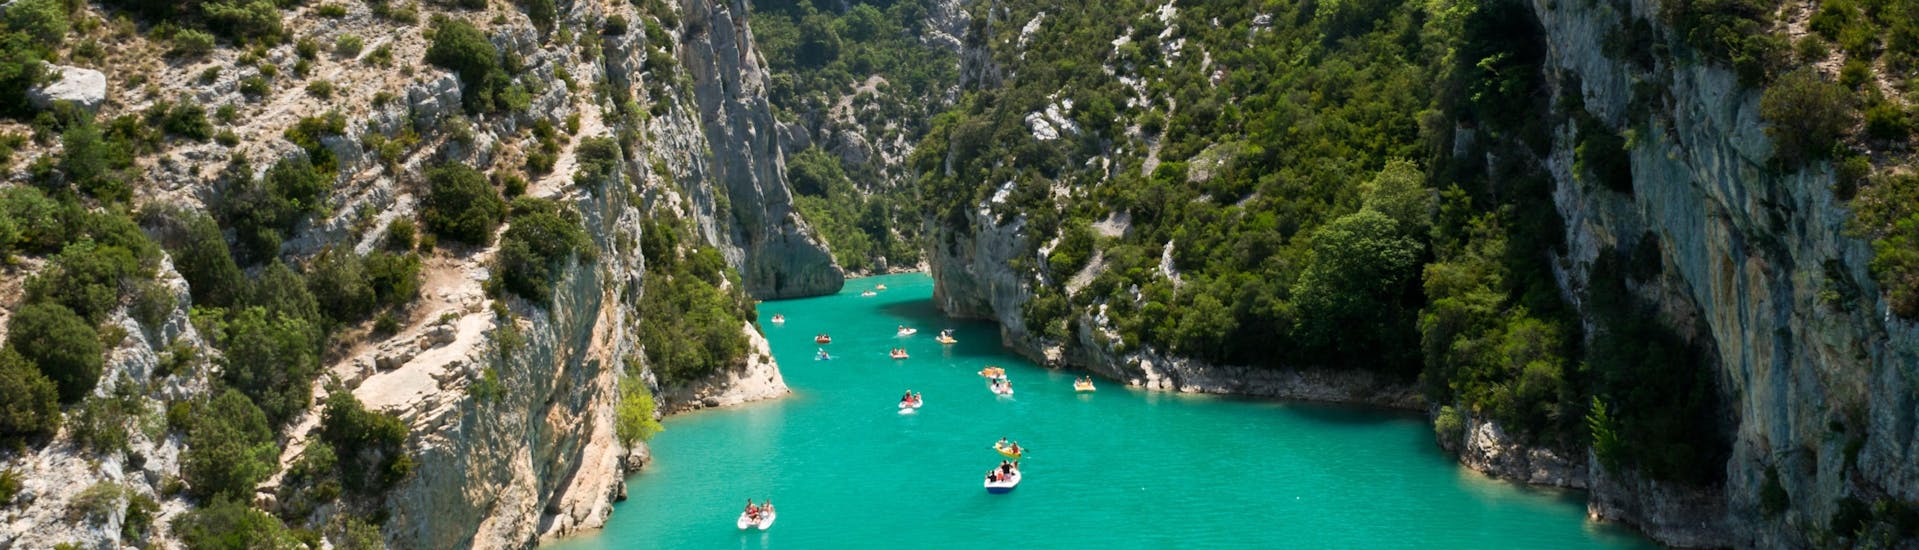 View of the Gorges du Verdon, where one can do canyoning in the Couloir Samson canyon.